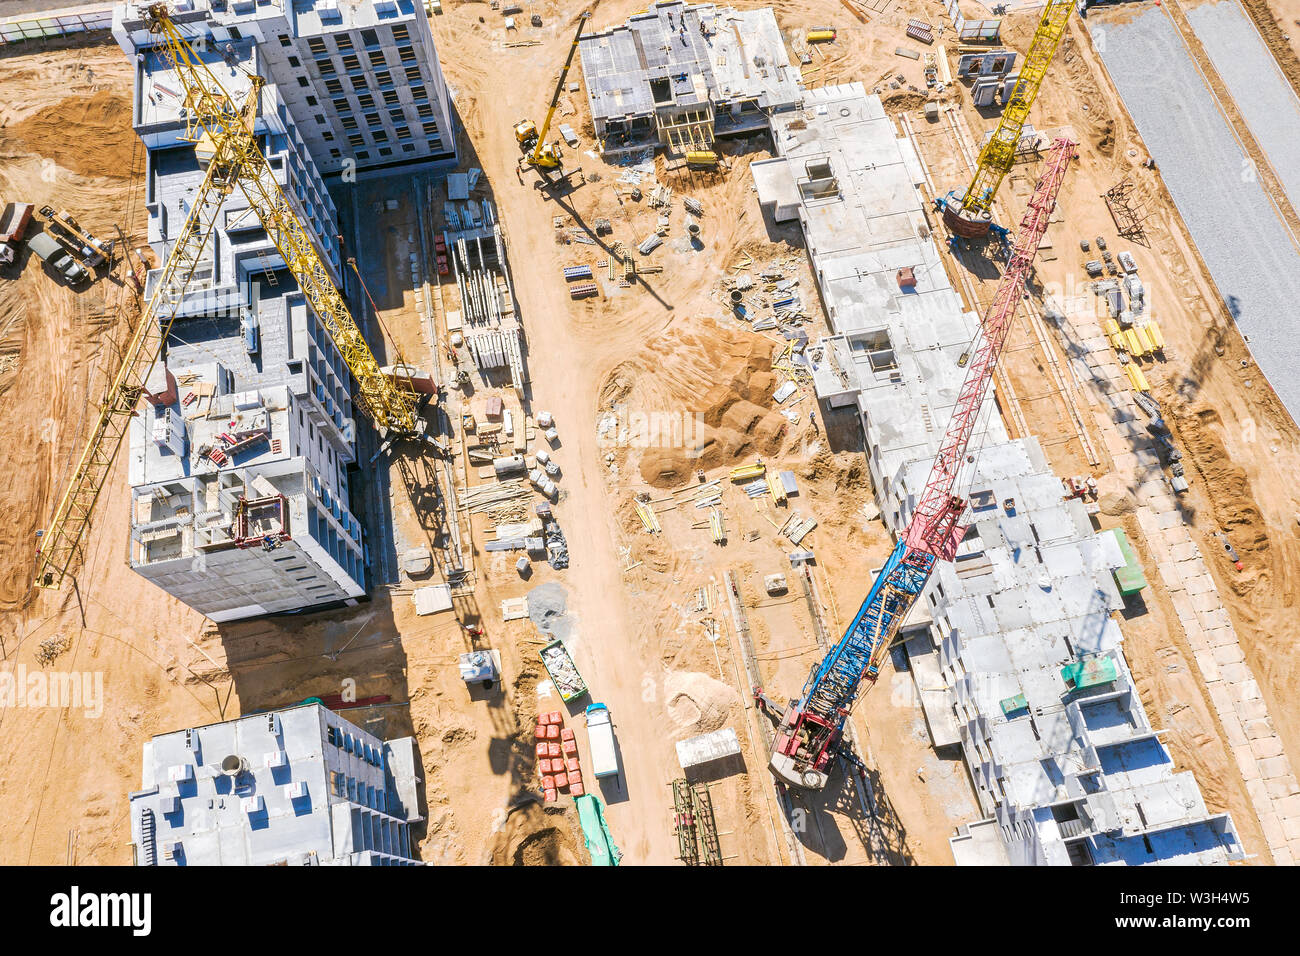 construction of new multistory apartment building. aerial view Stock Photo